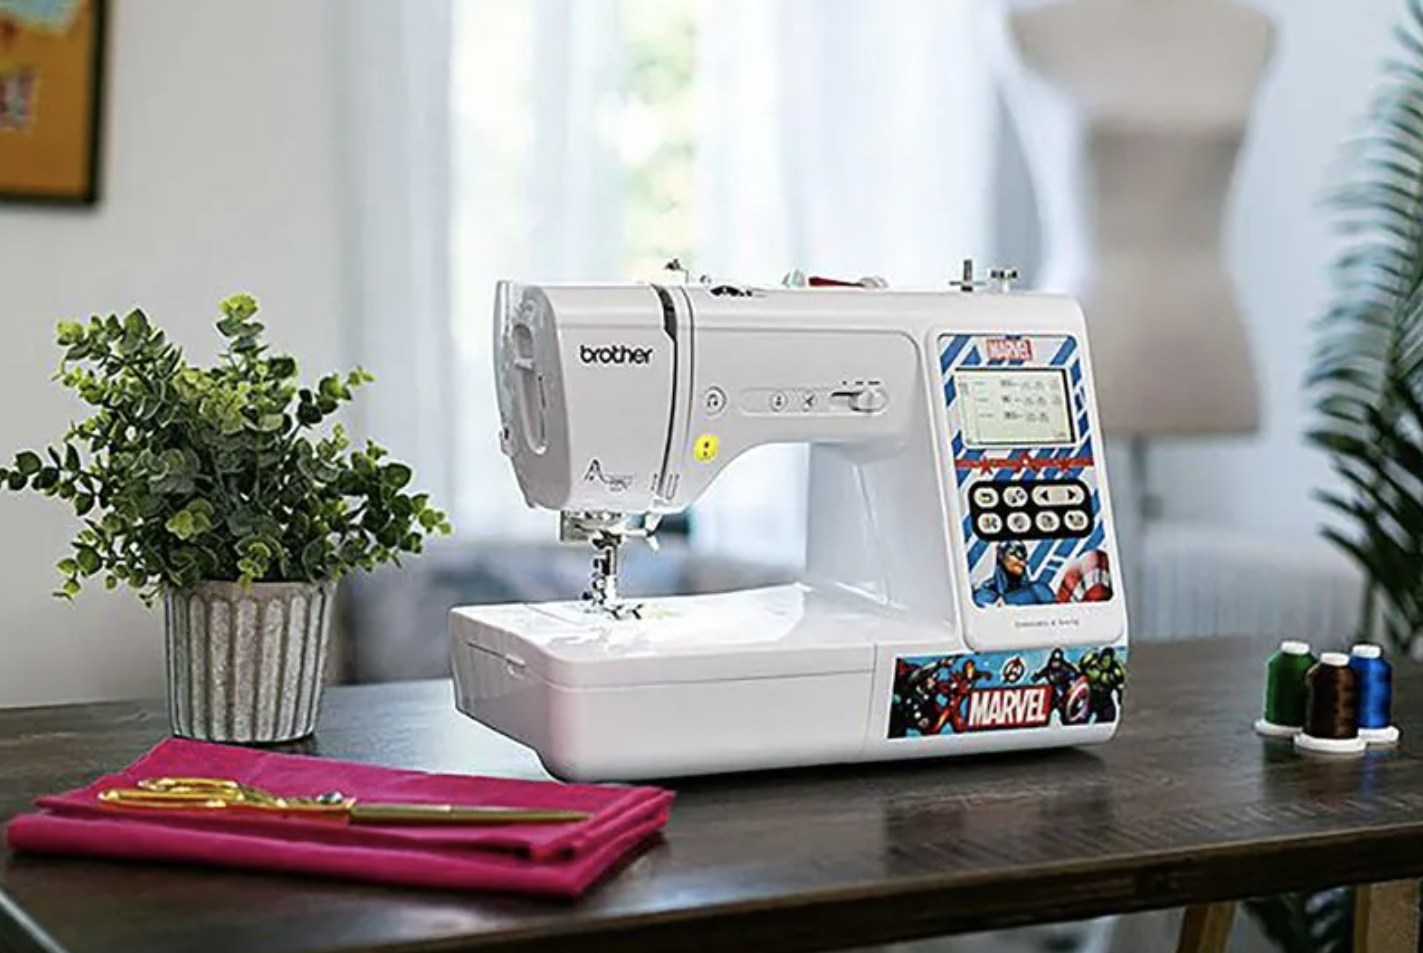 White embroidery machine on table decorated with Marvel characters